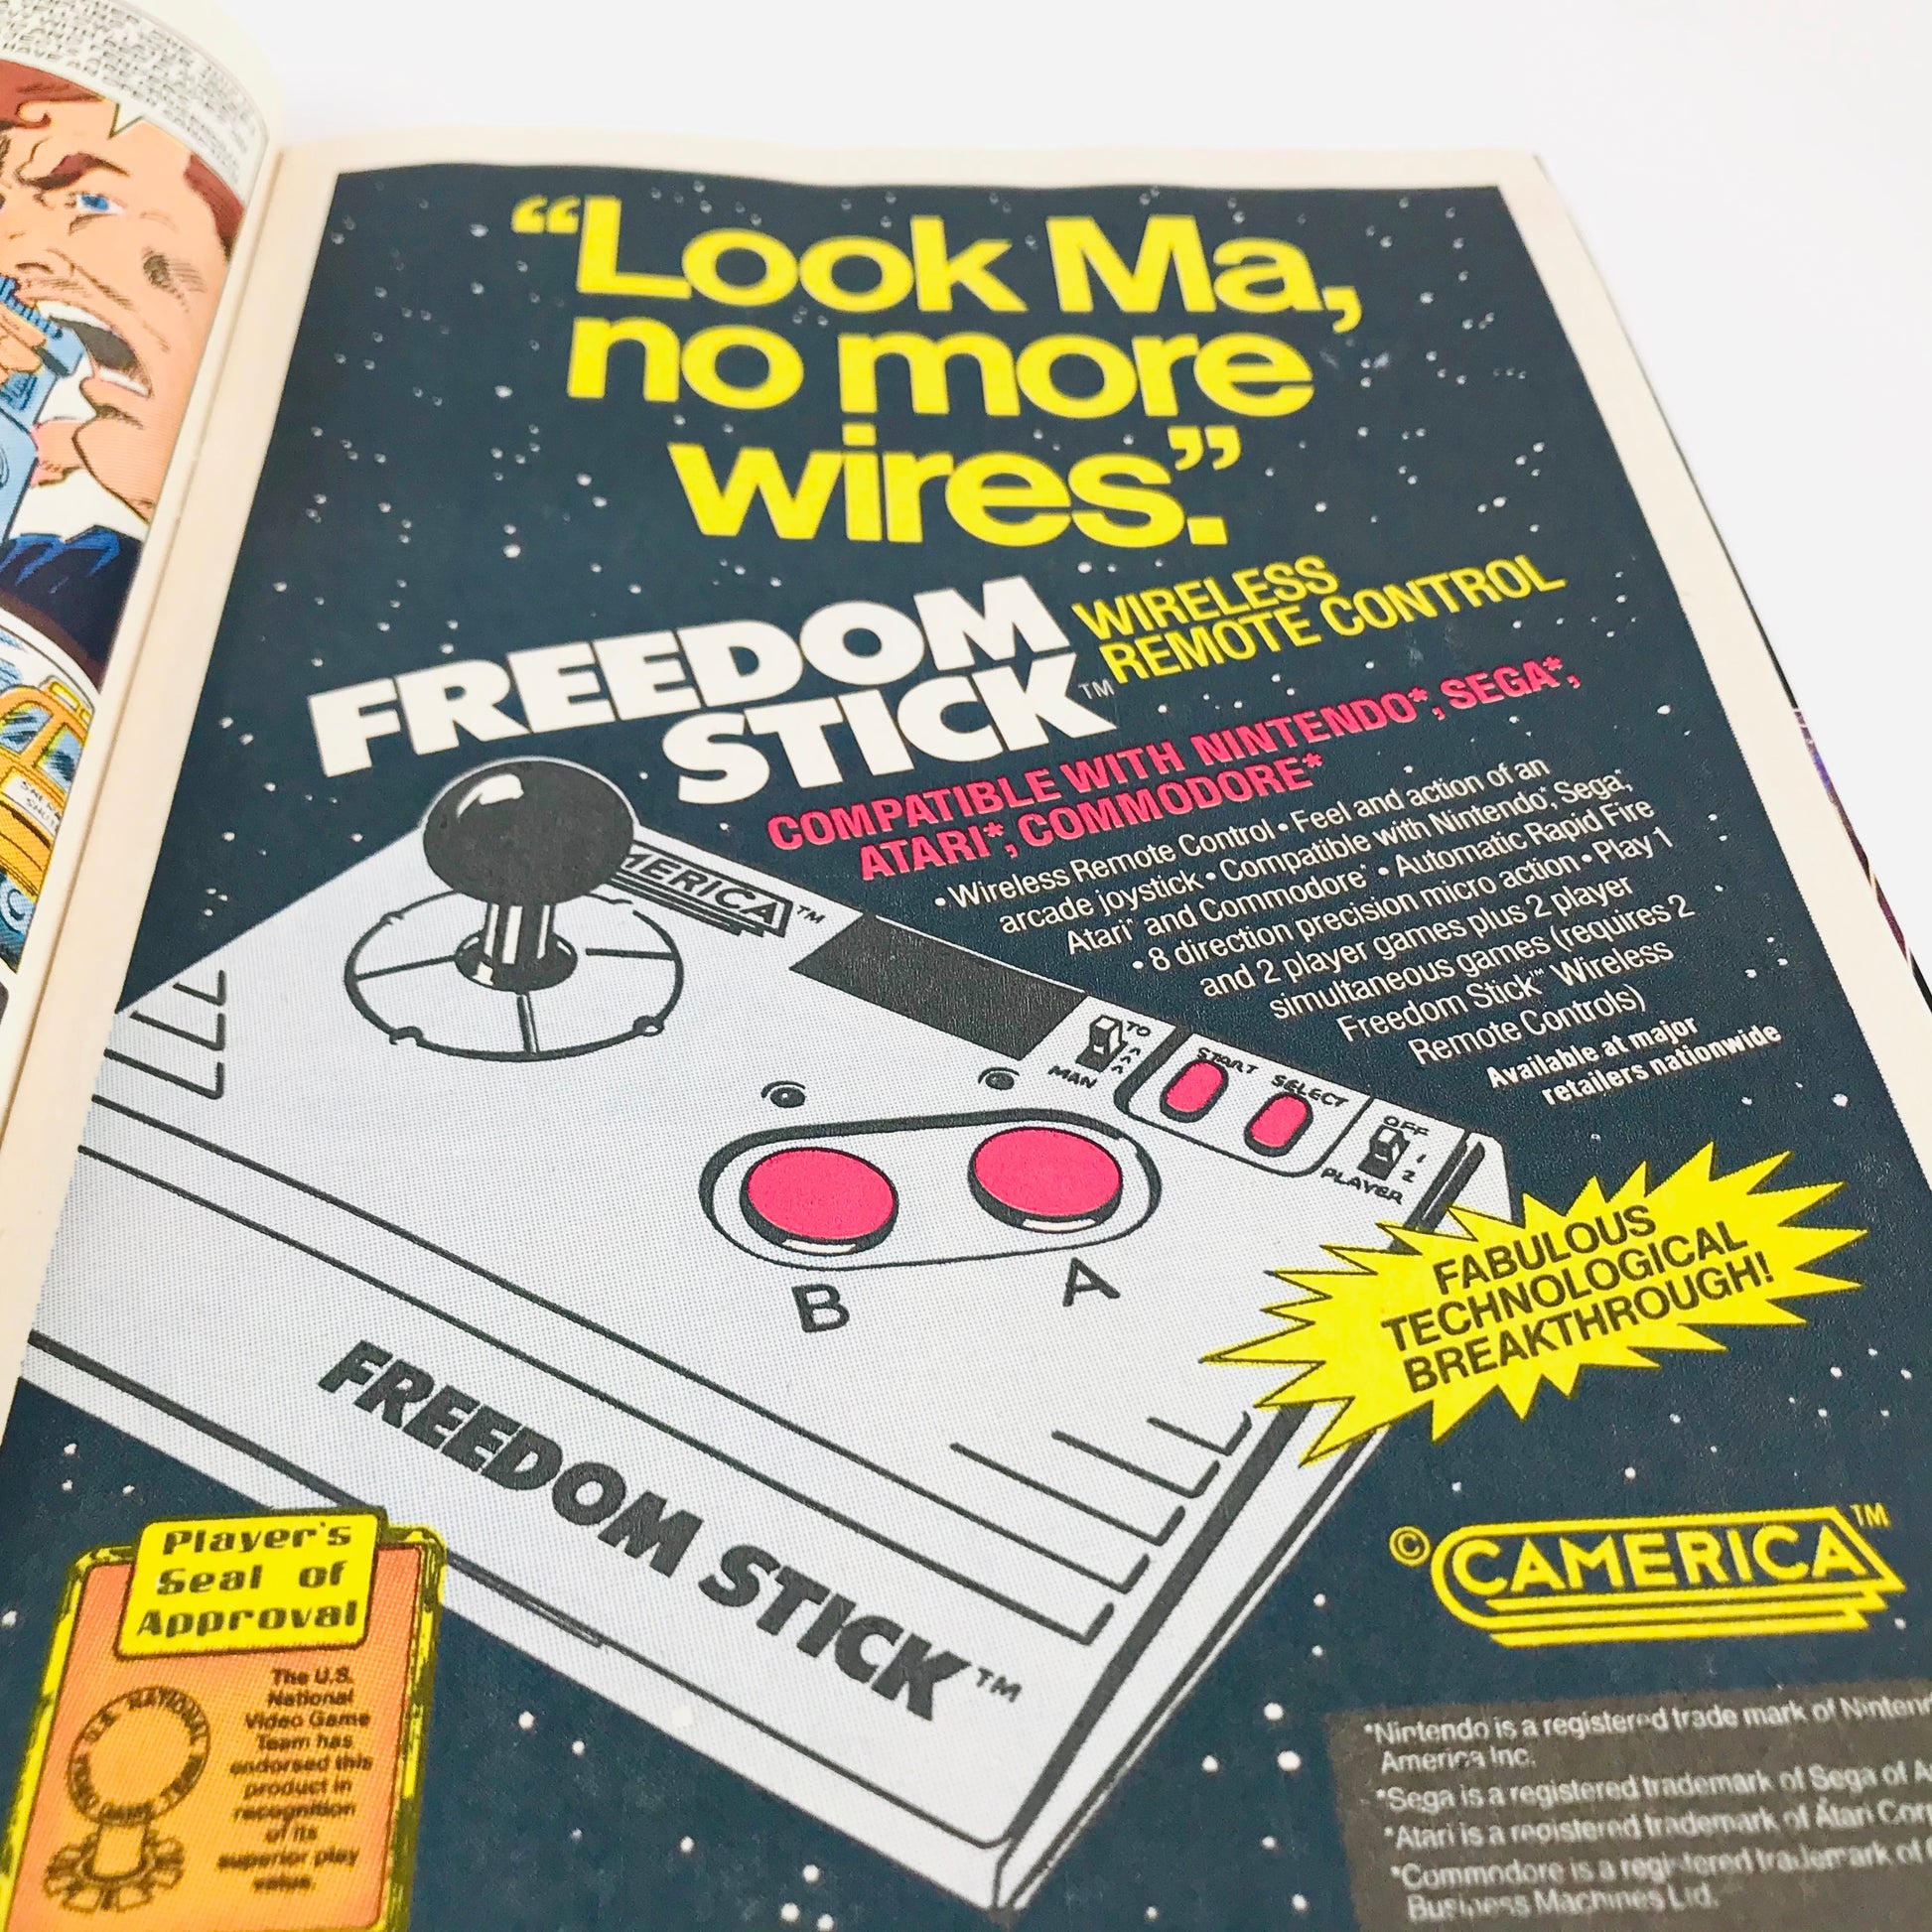 Totally 80s Nintendo ad from one of the inside pages of a Marvel GI Joe comic book.